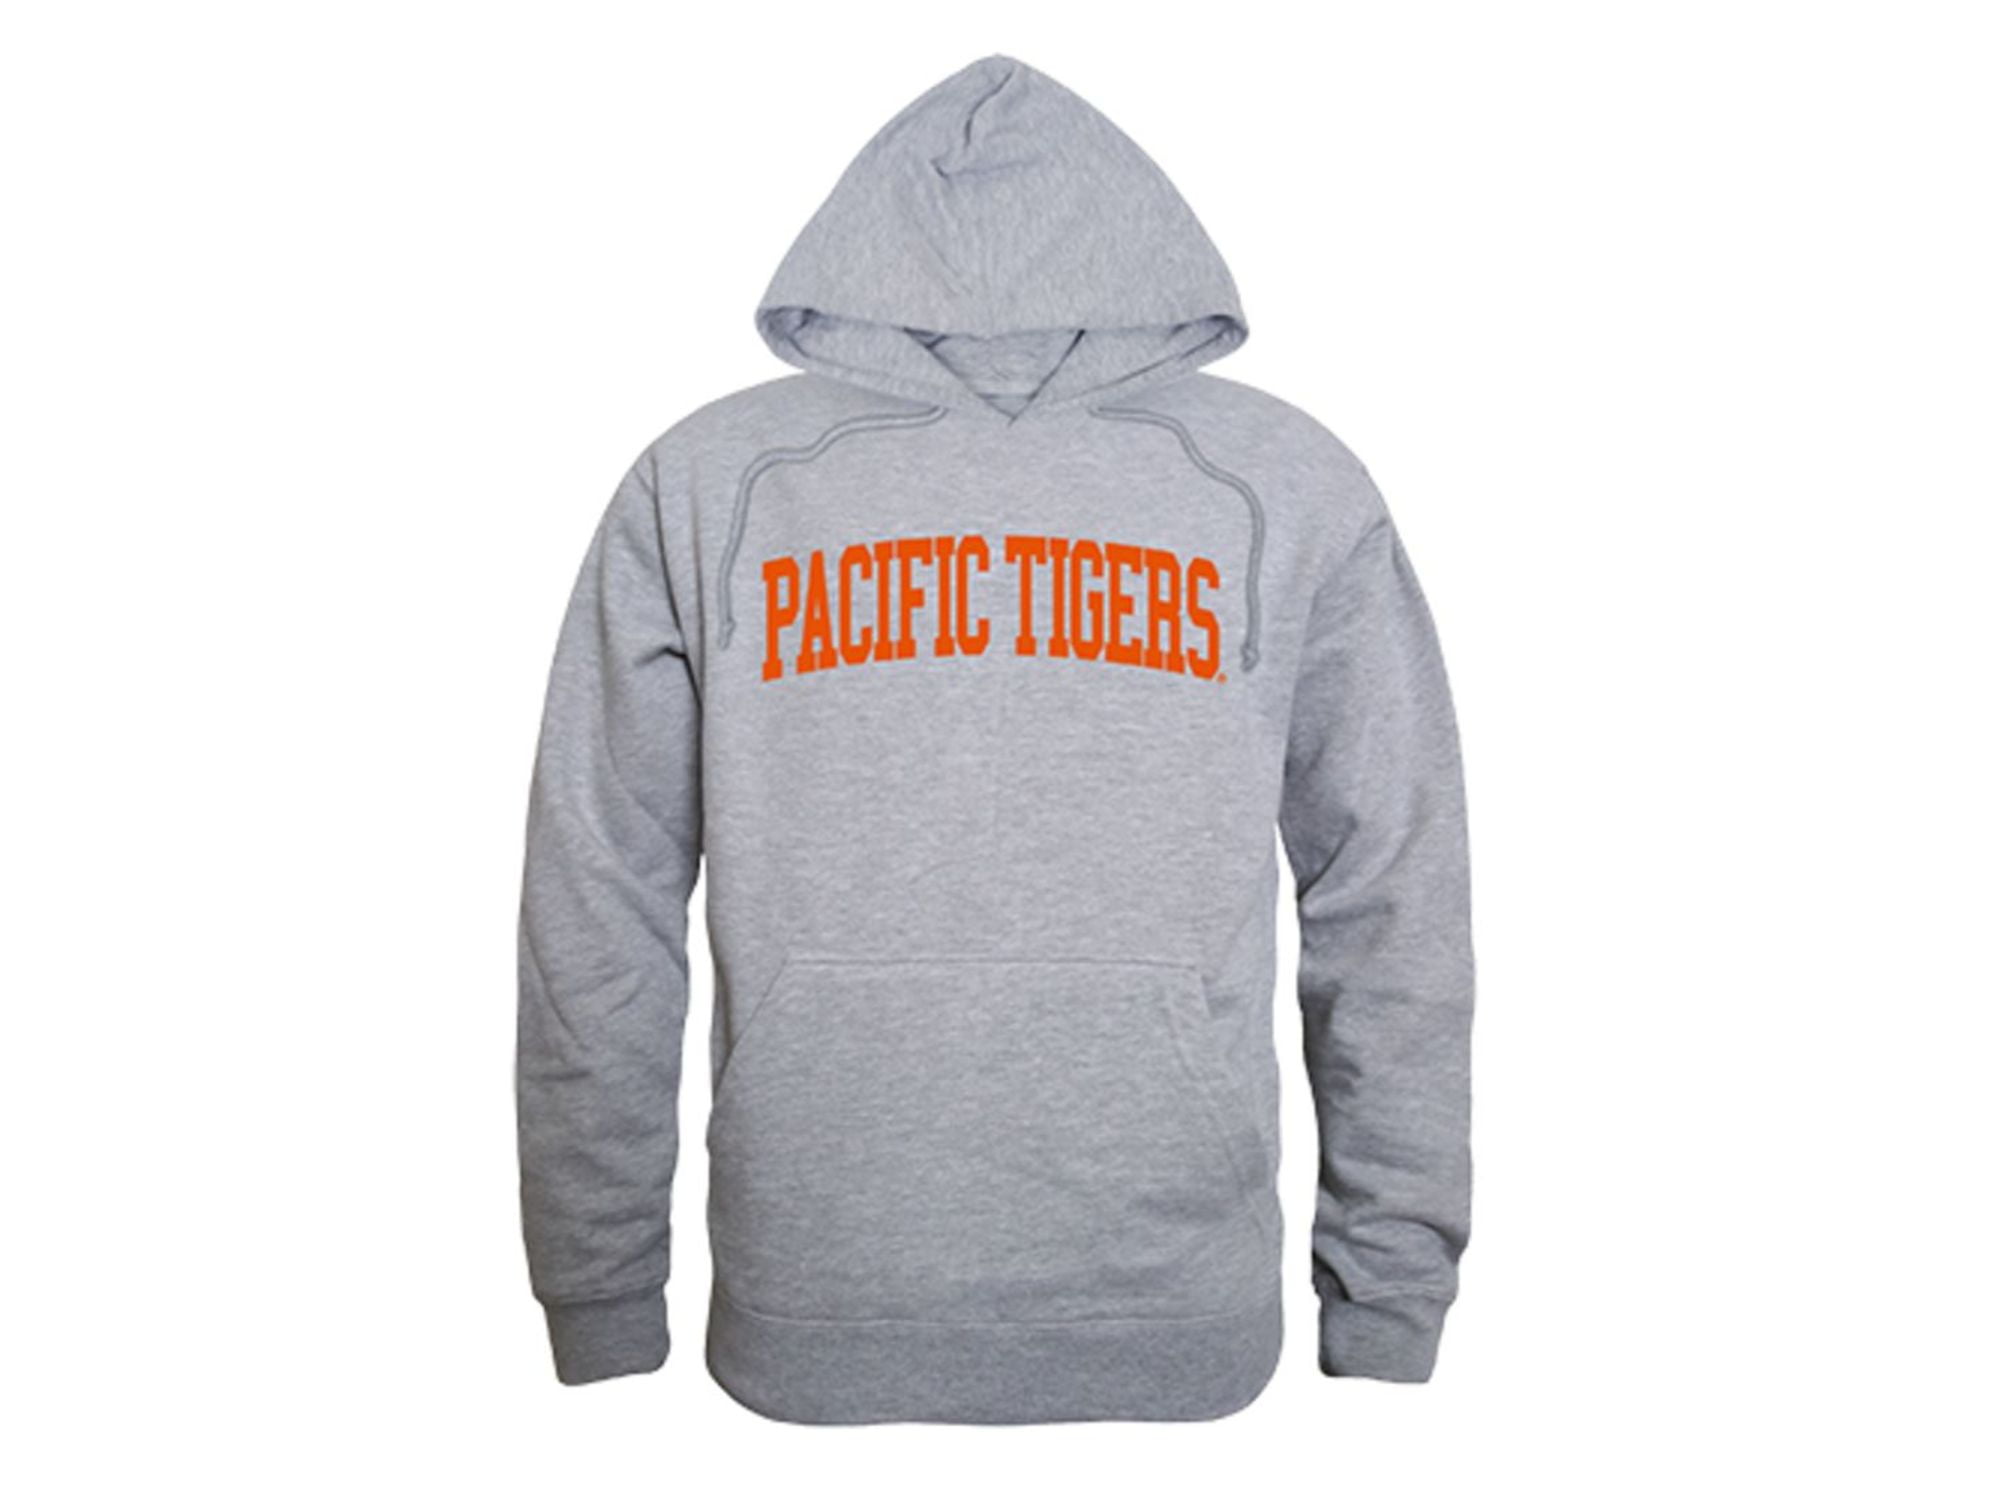 Heathered ProSphere University of The Pacific Girls Performance T-Shirt